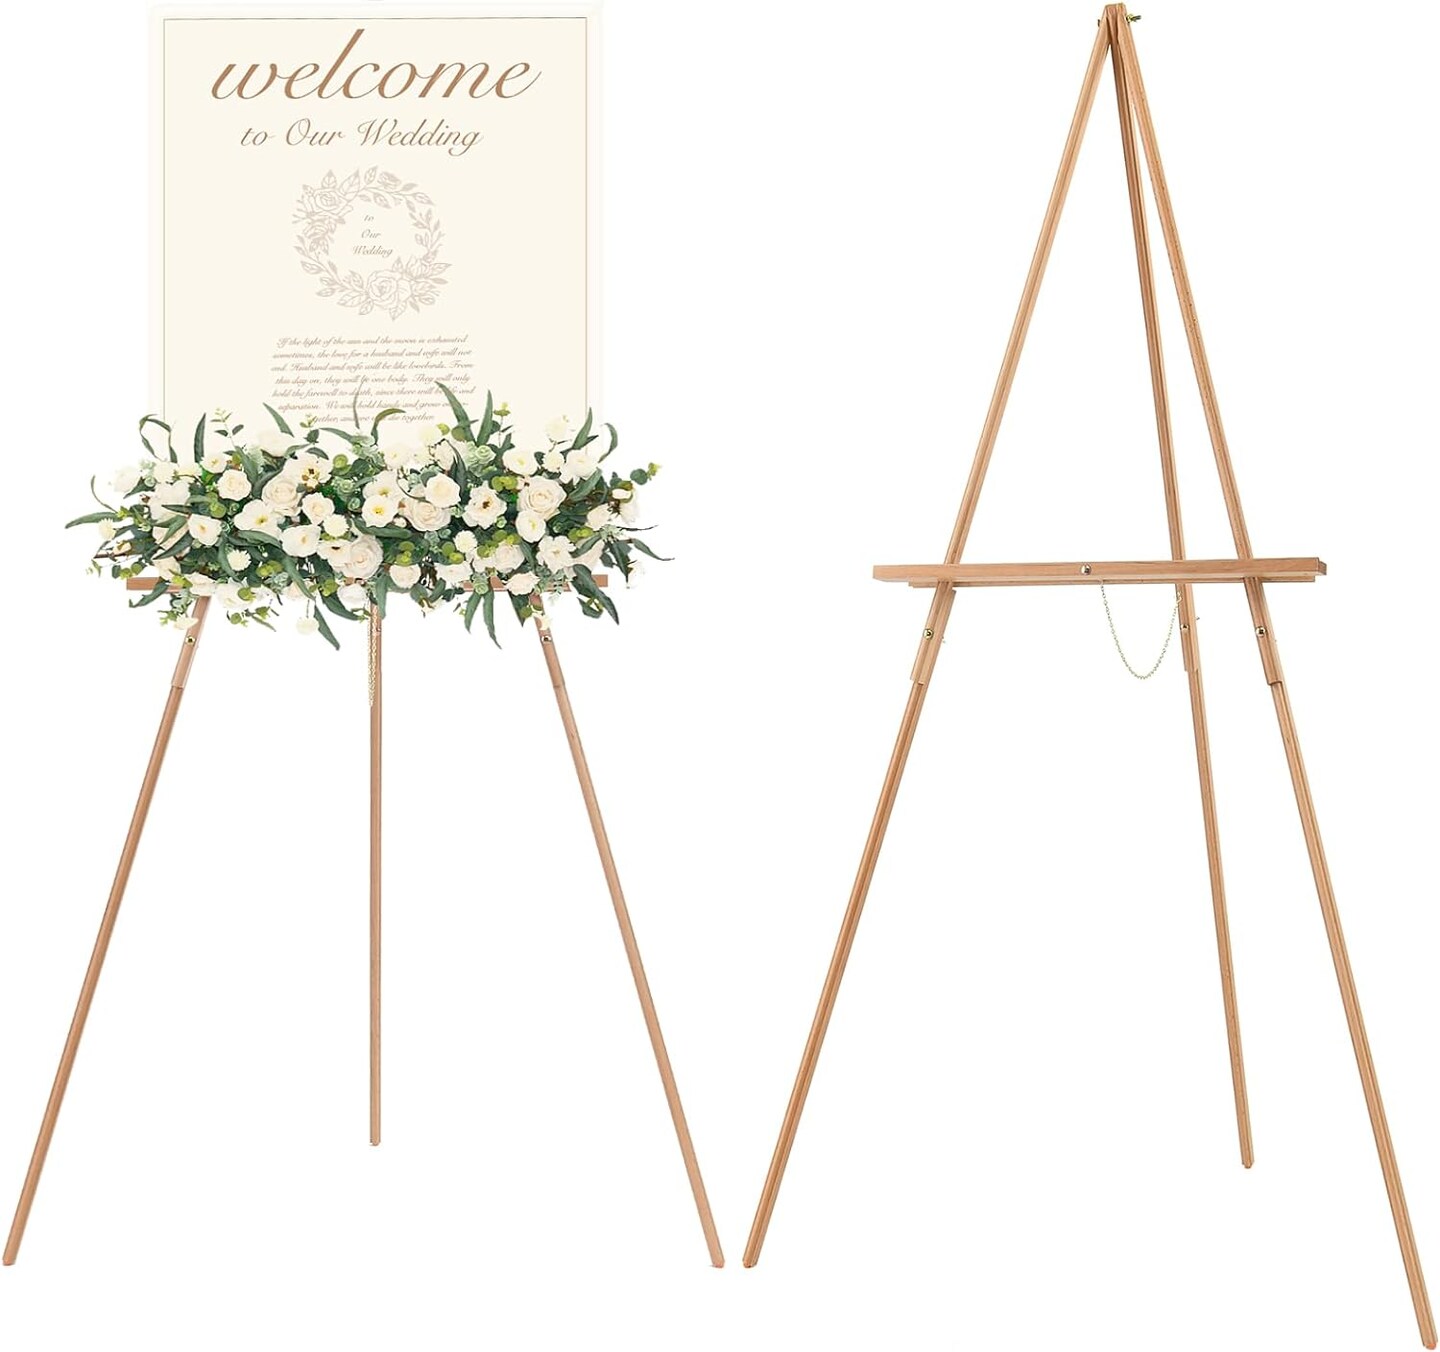 MEEDEN Wedding Easel for Display, Wooden Easel Stand for Wedding Sign, Lightweight Tripod for Posters, Pictures, Painting